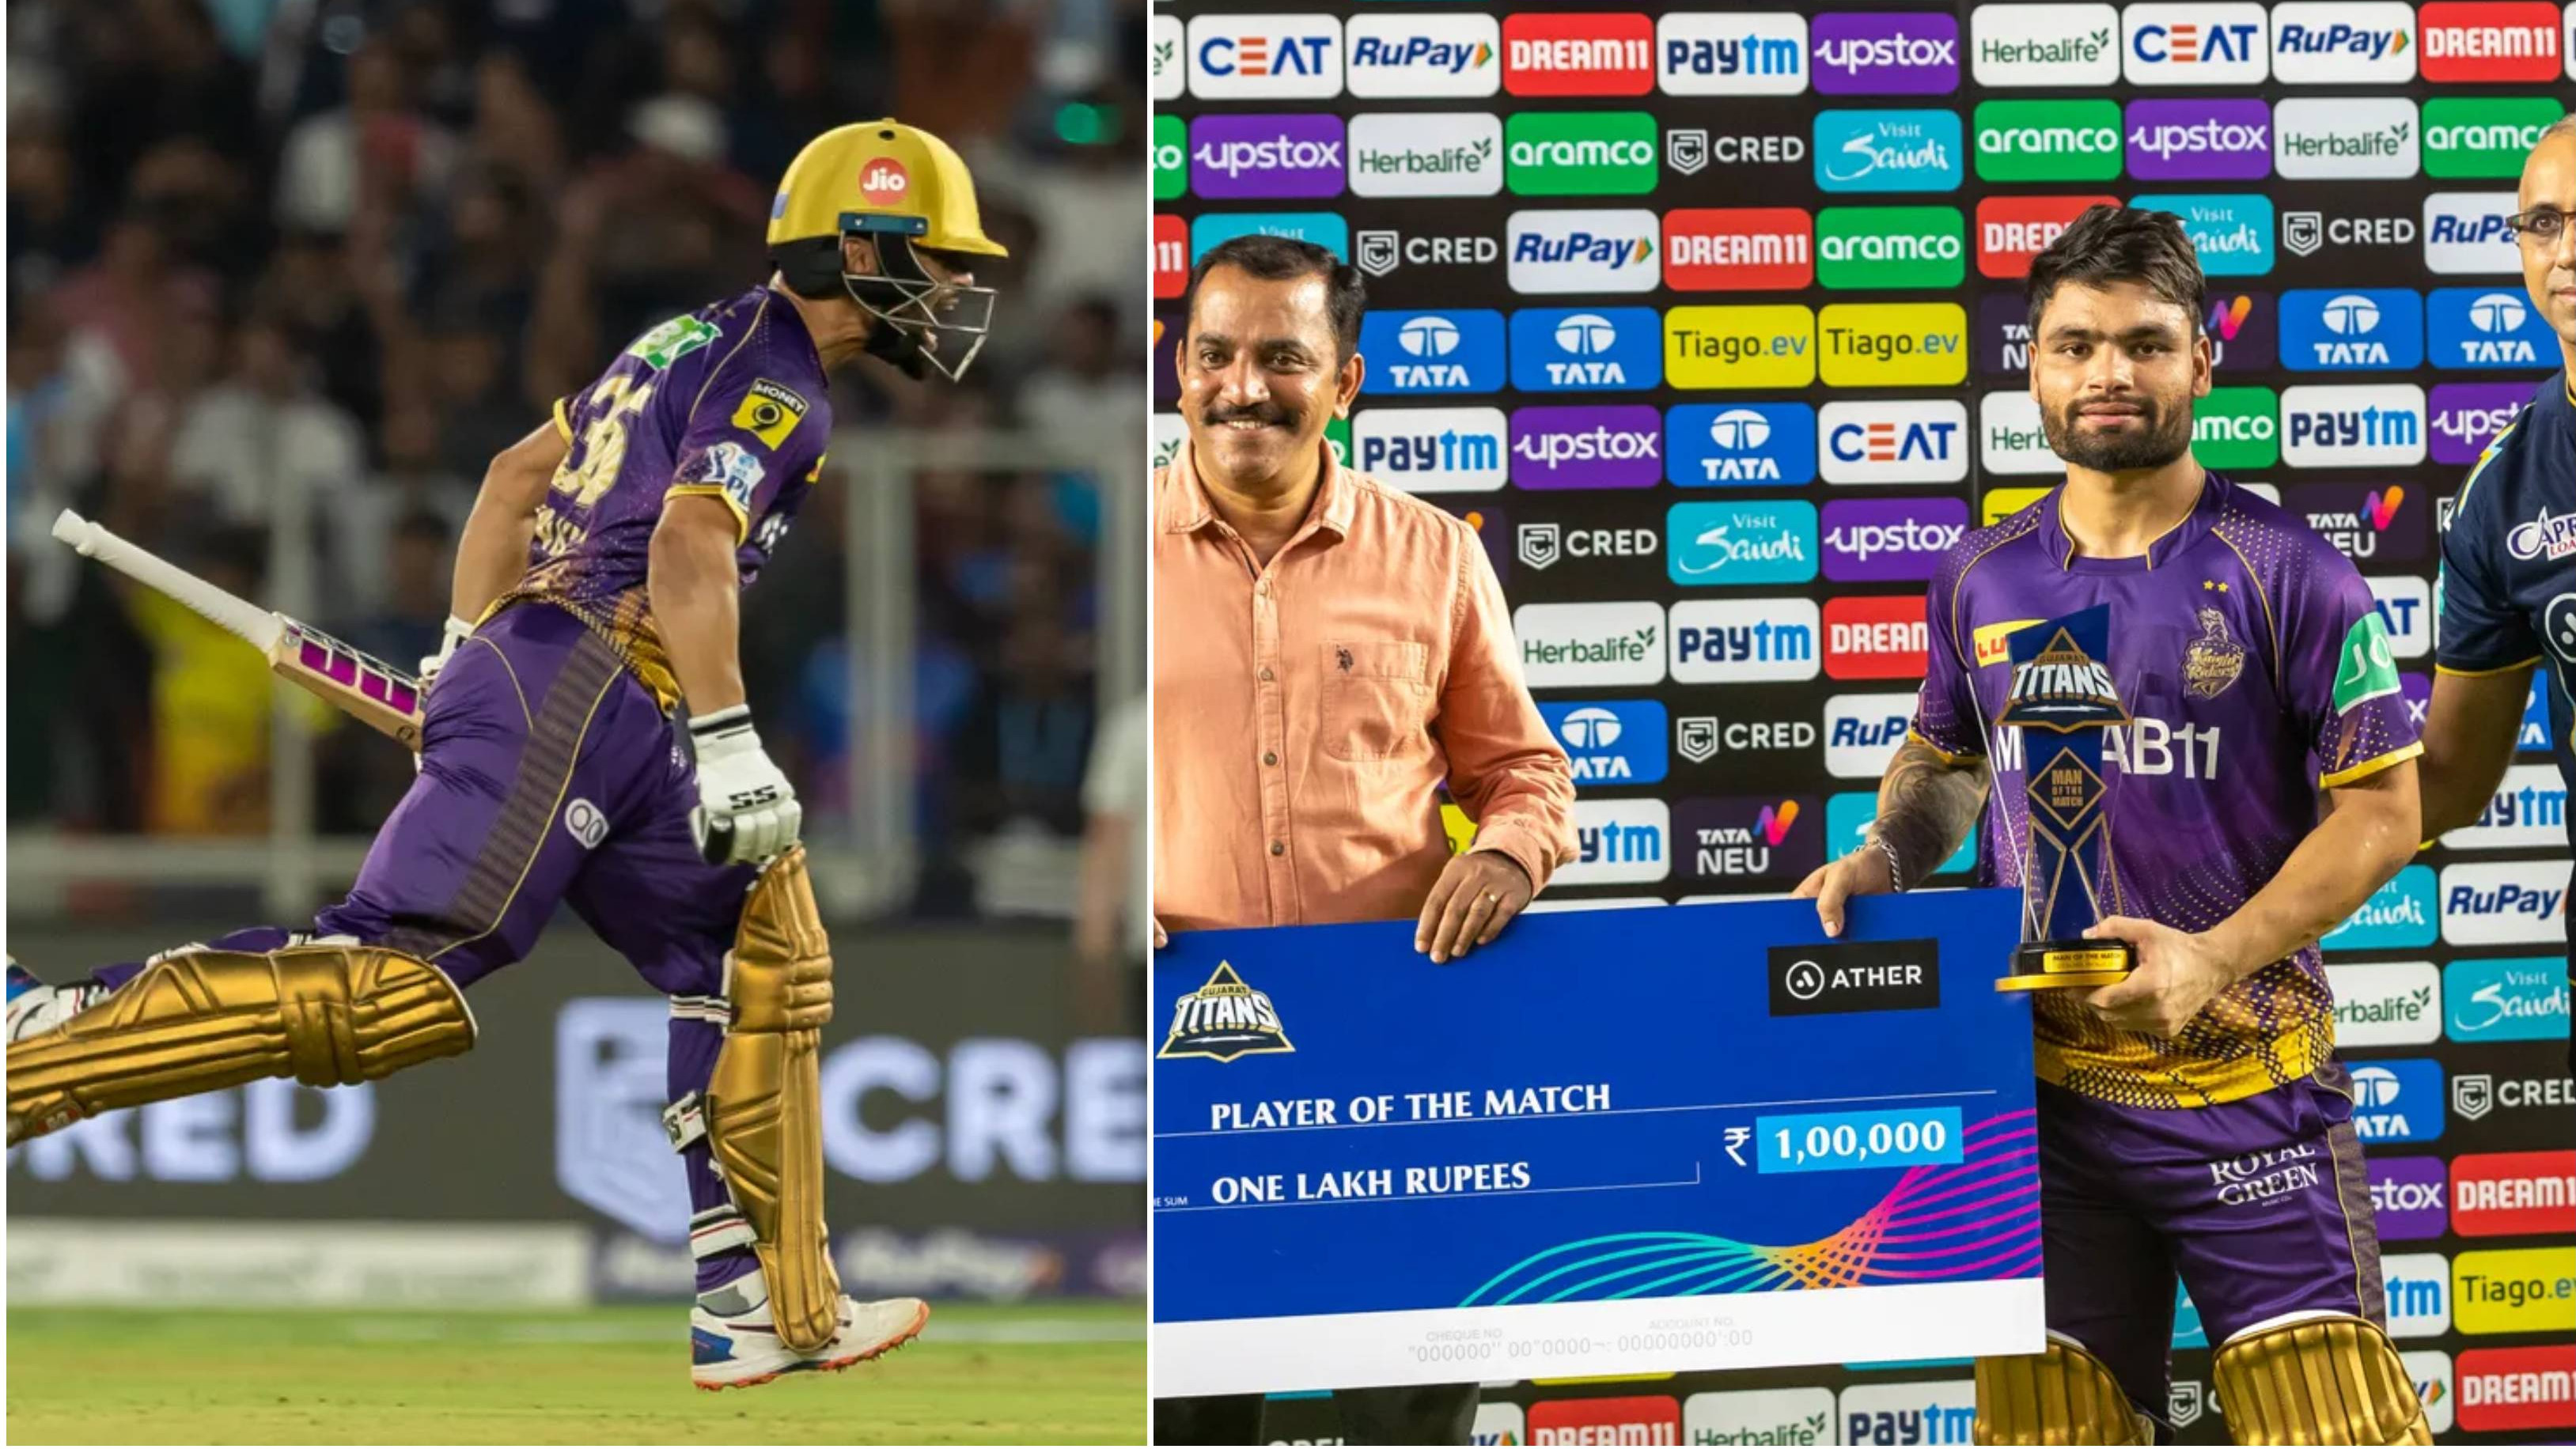 IPL 2023: “I had belief that I can do this,” Rinku Singh after slamming 5 straight sixes to script KKR’s win over GT